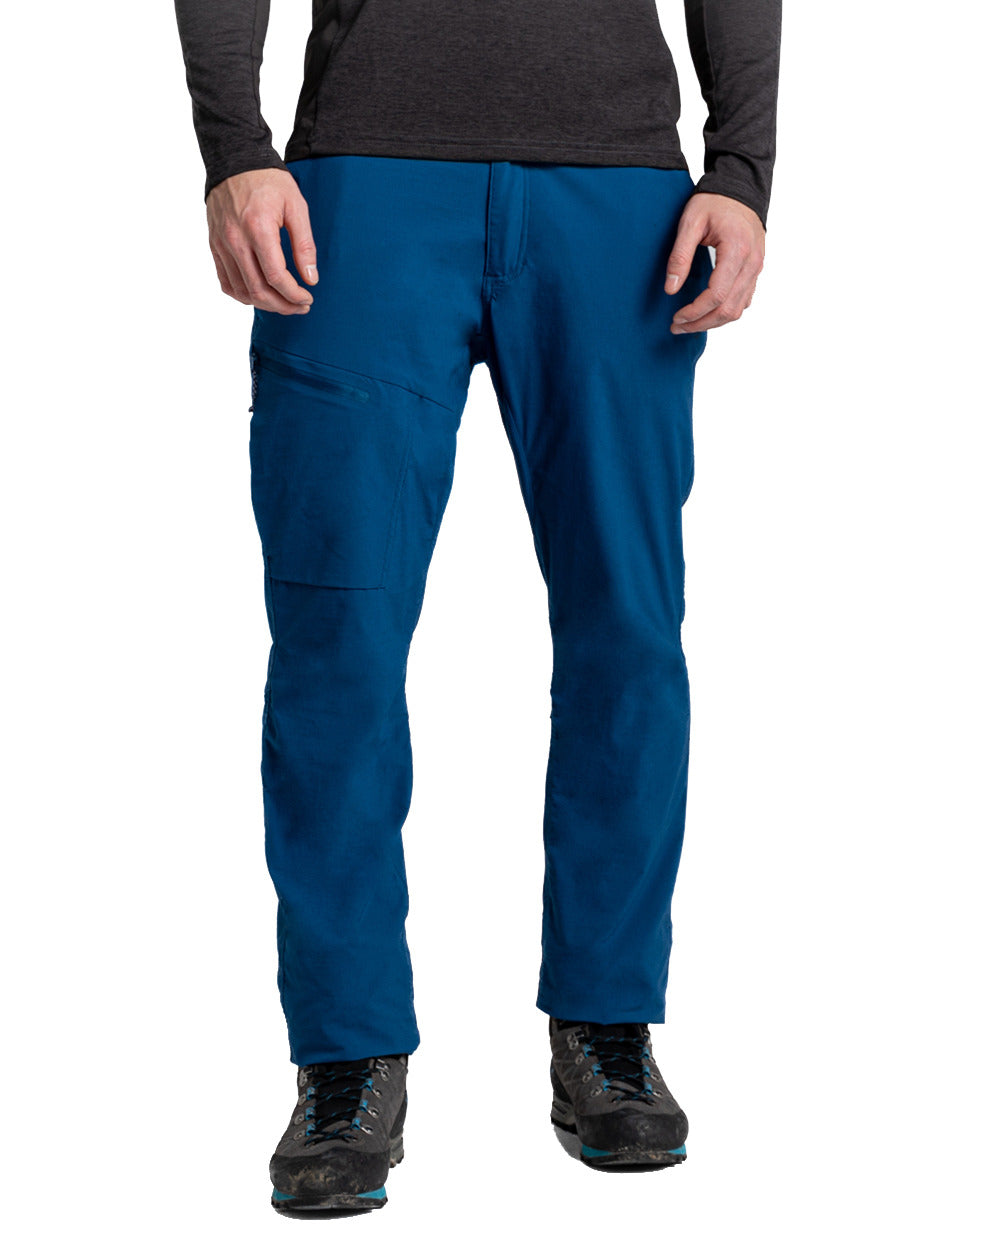 Poseidon Blue Coloured Craghoppers Mens NosiLife Pro Active Trousers On A White Background 